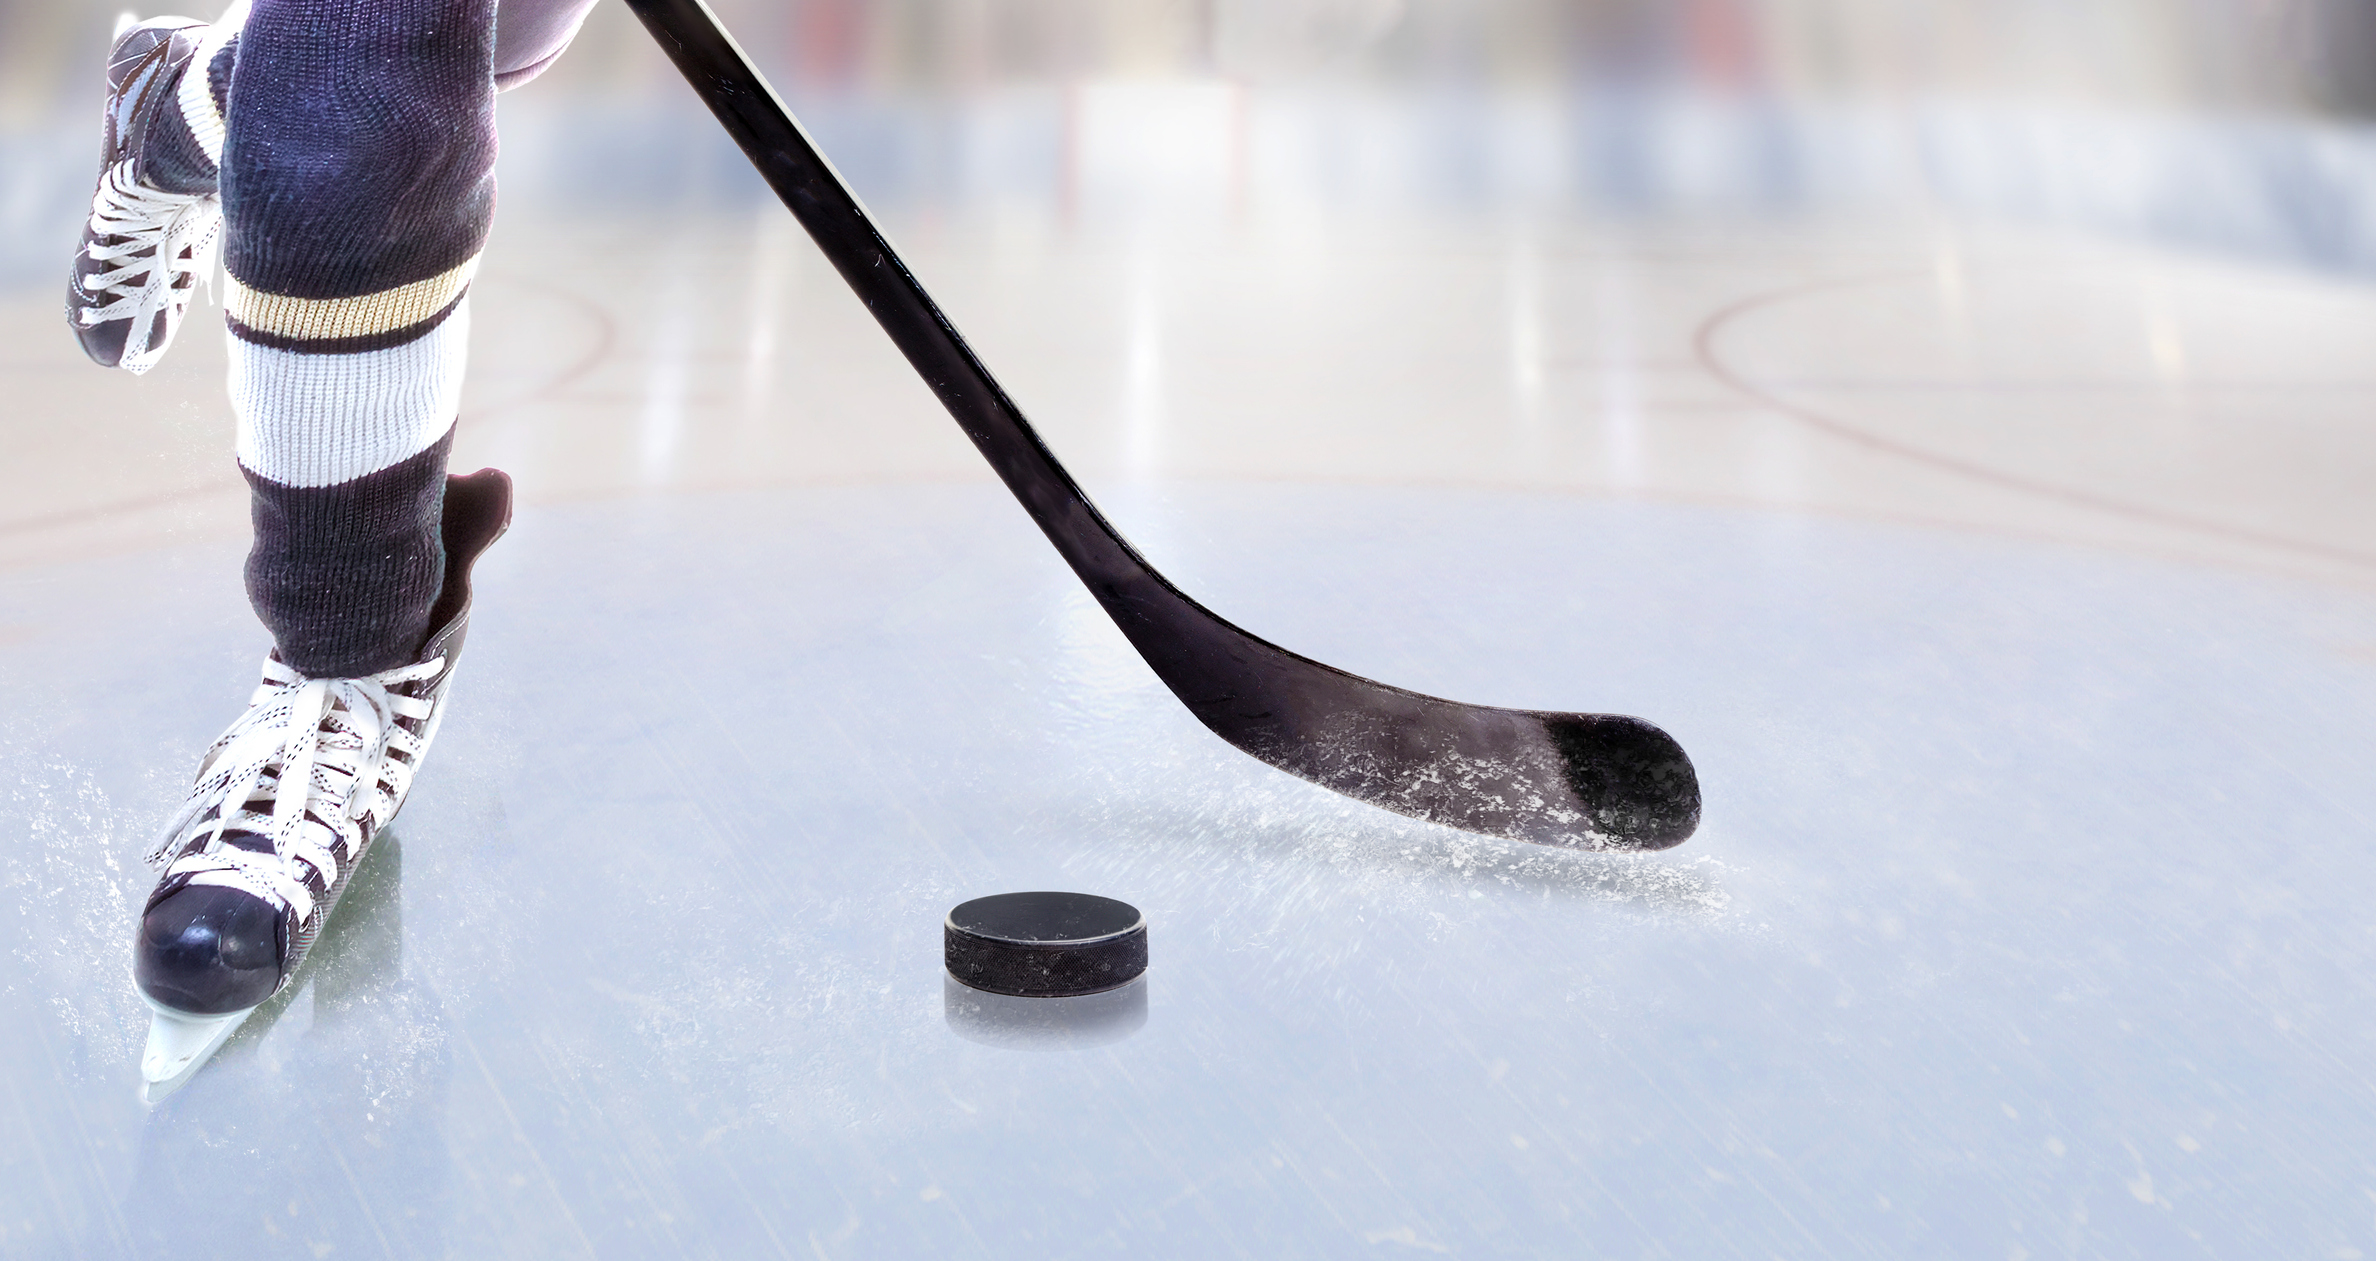 Hockey Player Arrested on Suspicion of Manslaughter After His Skate Kills Player During Game